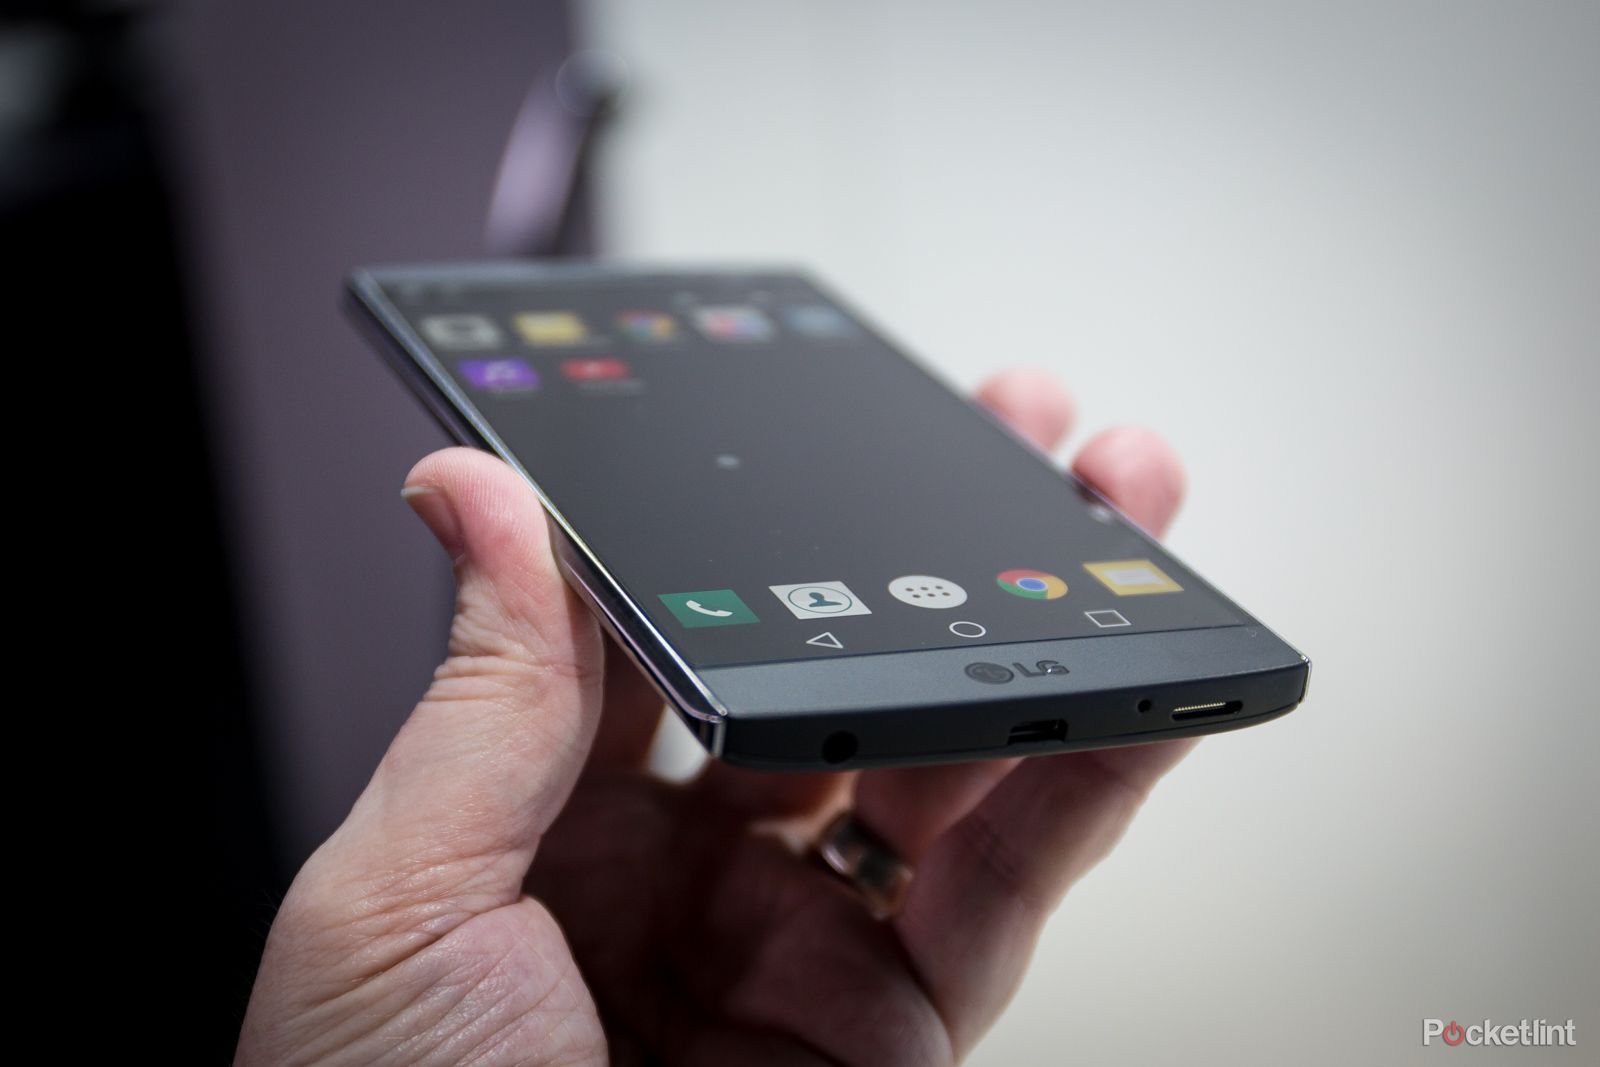 lg v10 smartphone coming to the uk image 3